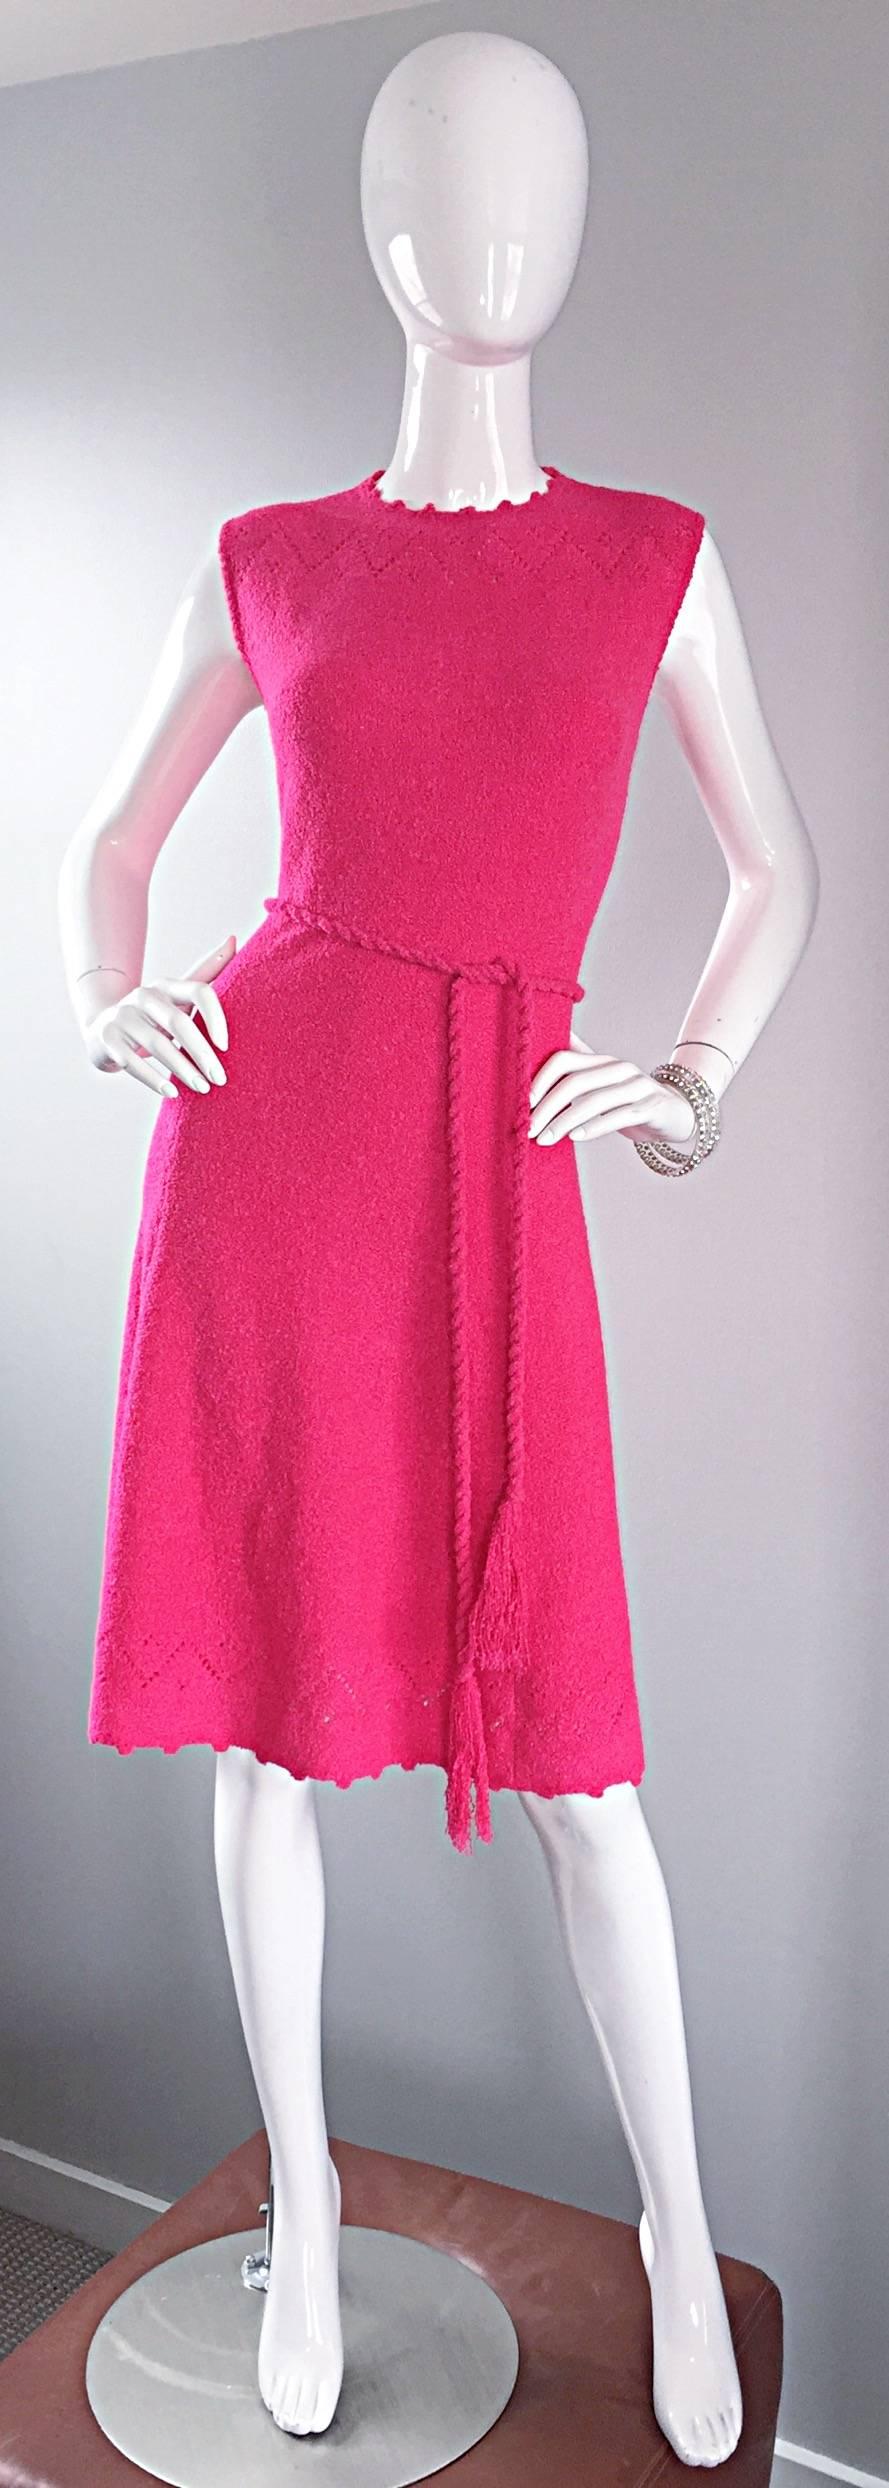 Hands down the most chic vintage 1960s ST. JOHN hot pink / fuchsia knit       A-Line dress! Features crochet detail at neck and at hem. Detachable matching tassel belt. Hidden zipper up the back with hook-and-eye closure. Super soft knit feels so